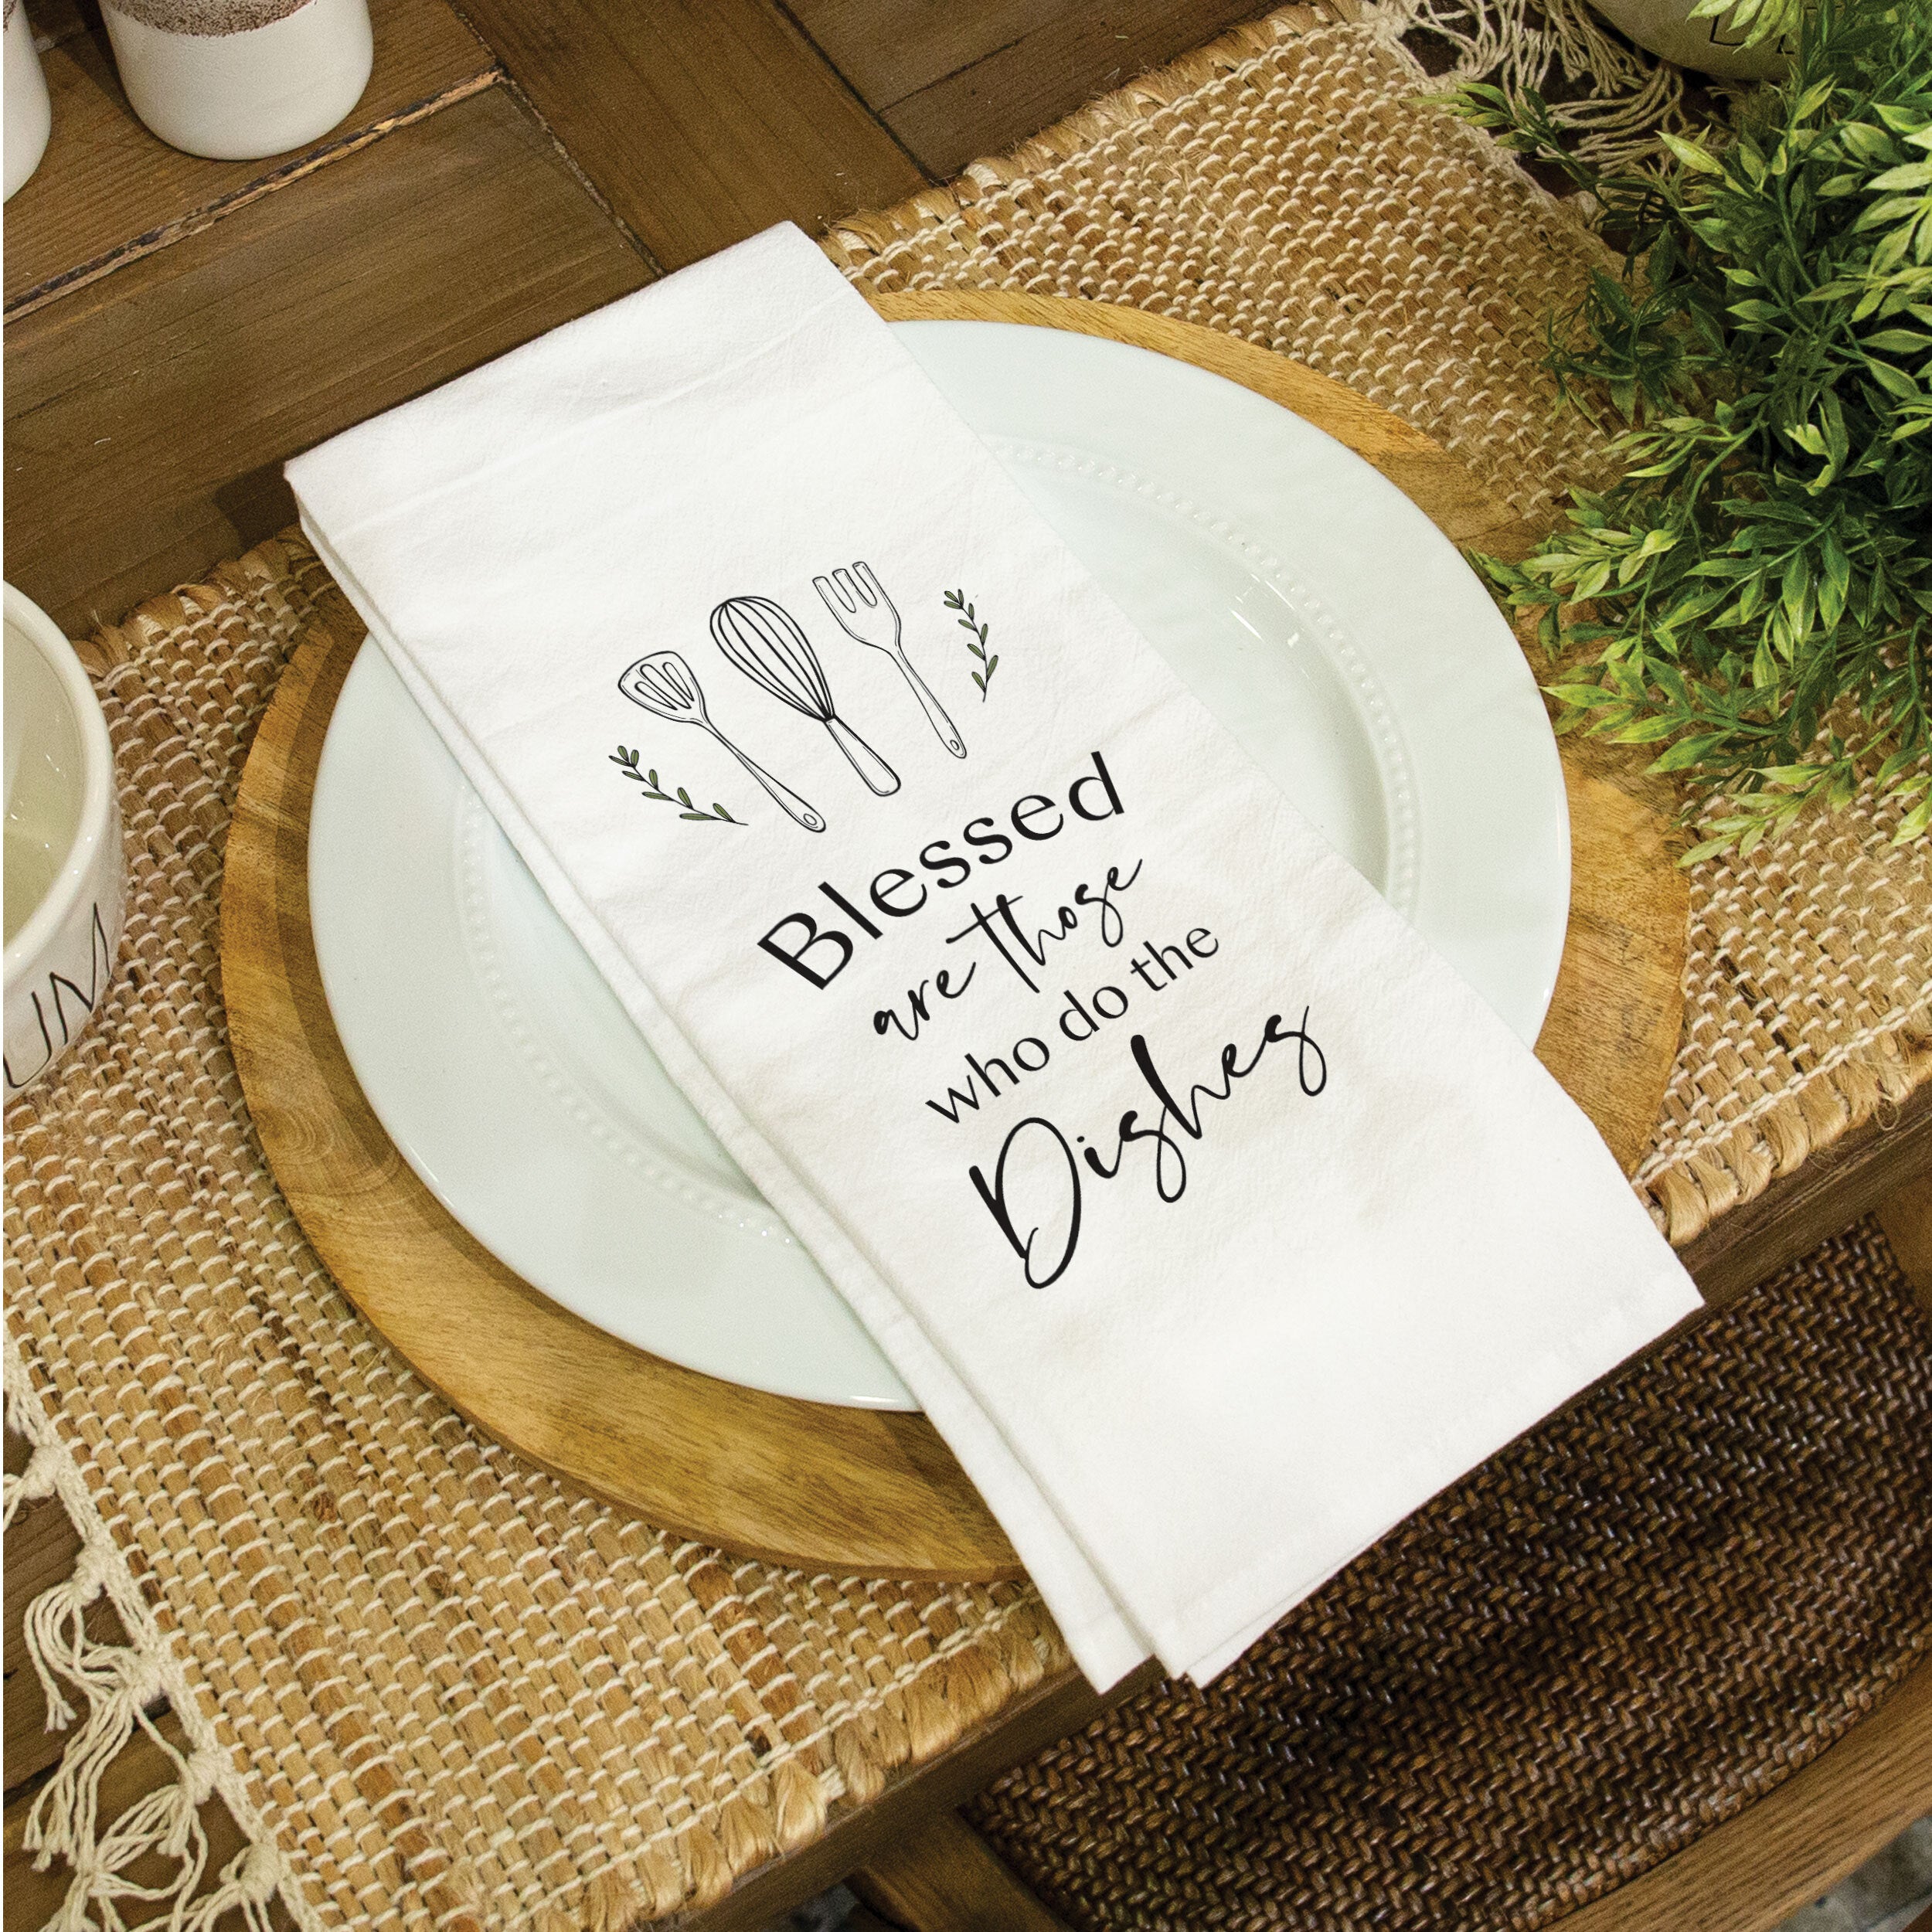 Blessed Are Those Who Do The Dishes Tea Towel